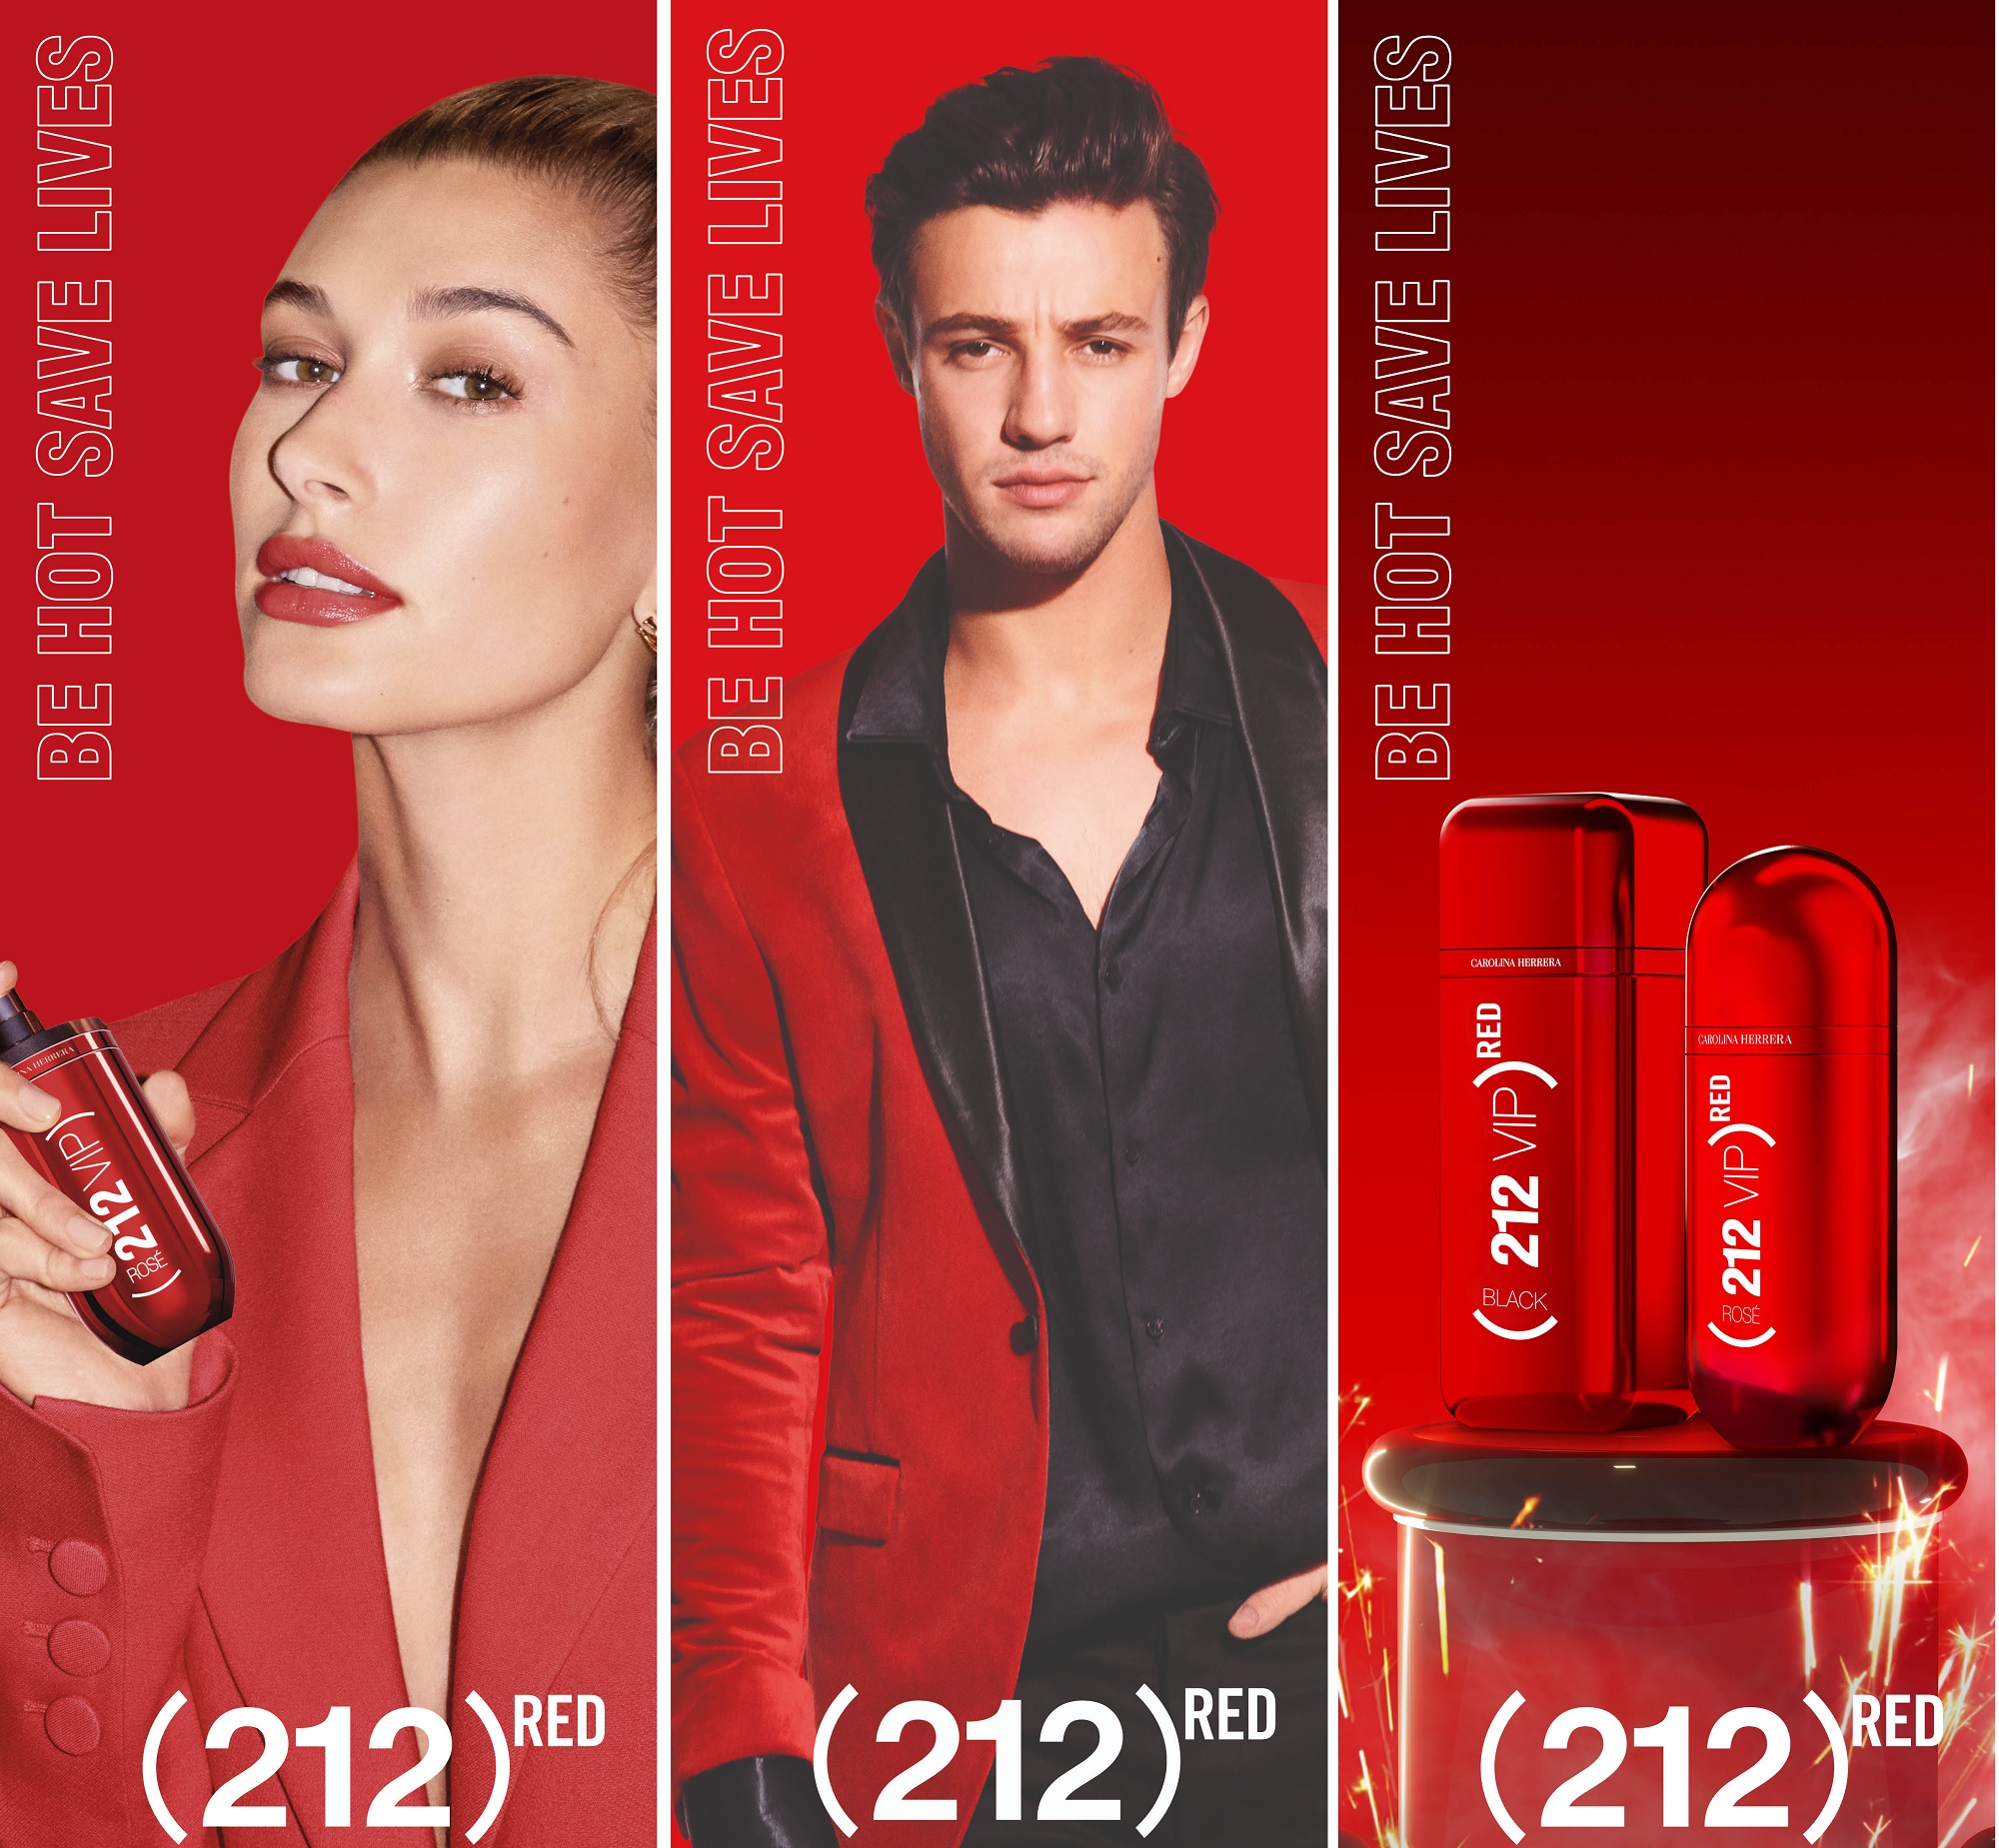 212 VIP BLack Red This Product Saves Lives Limited Edition Linh Perfume